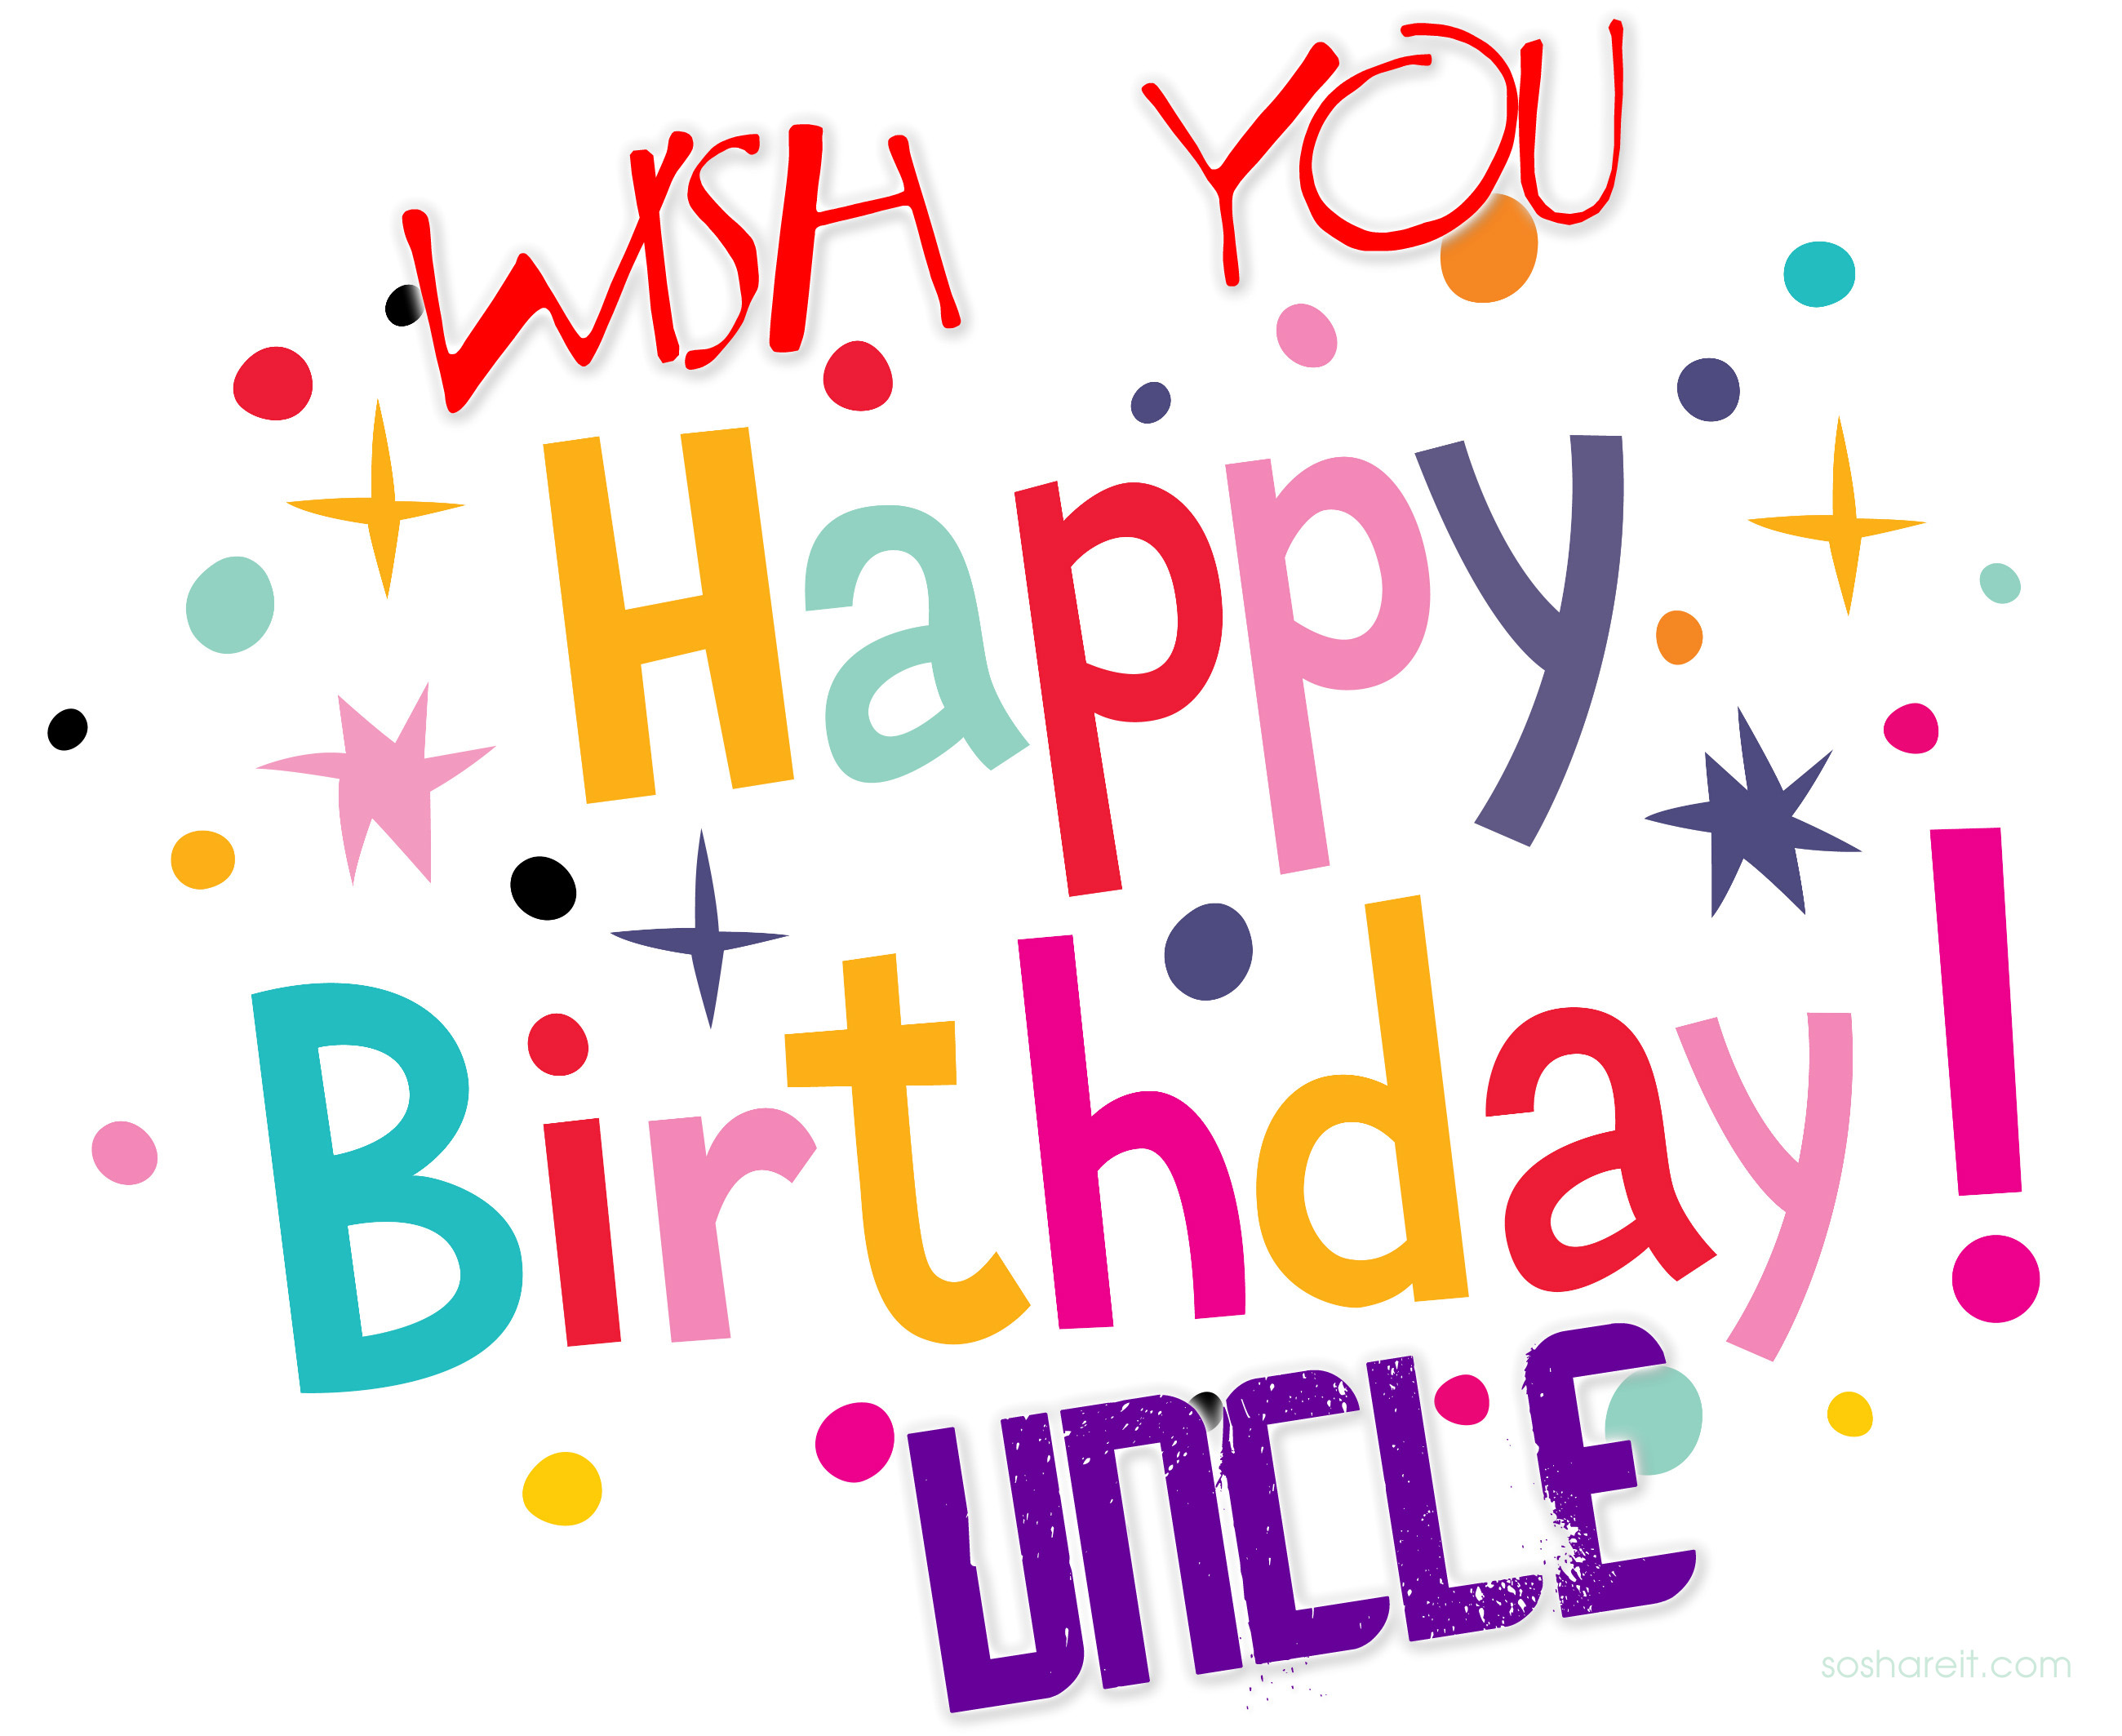 50 Happy Birthday Uncle Wishes And Wallpaper